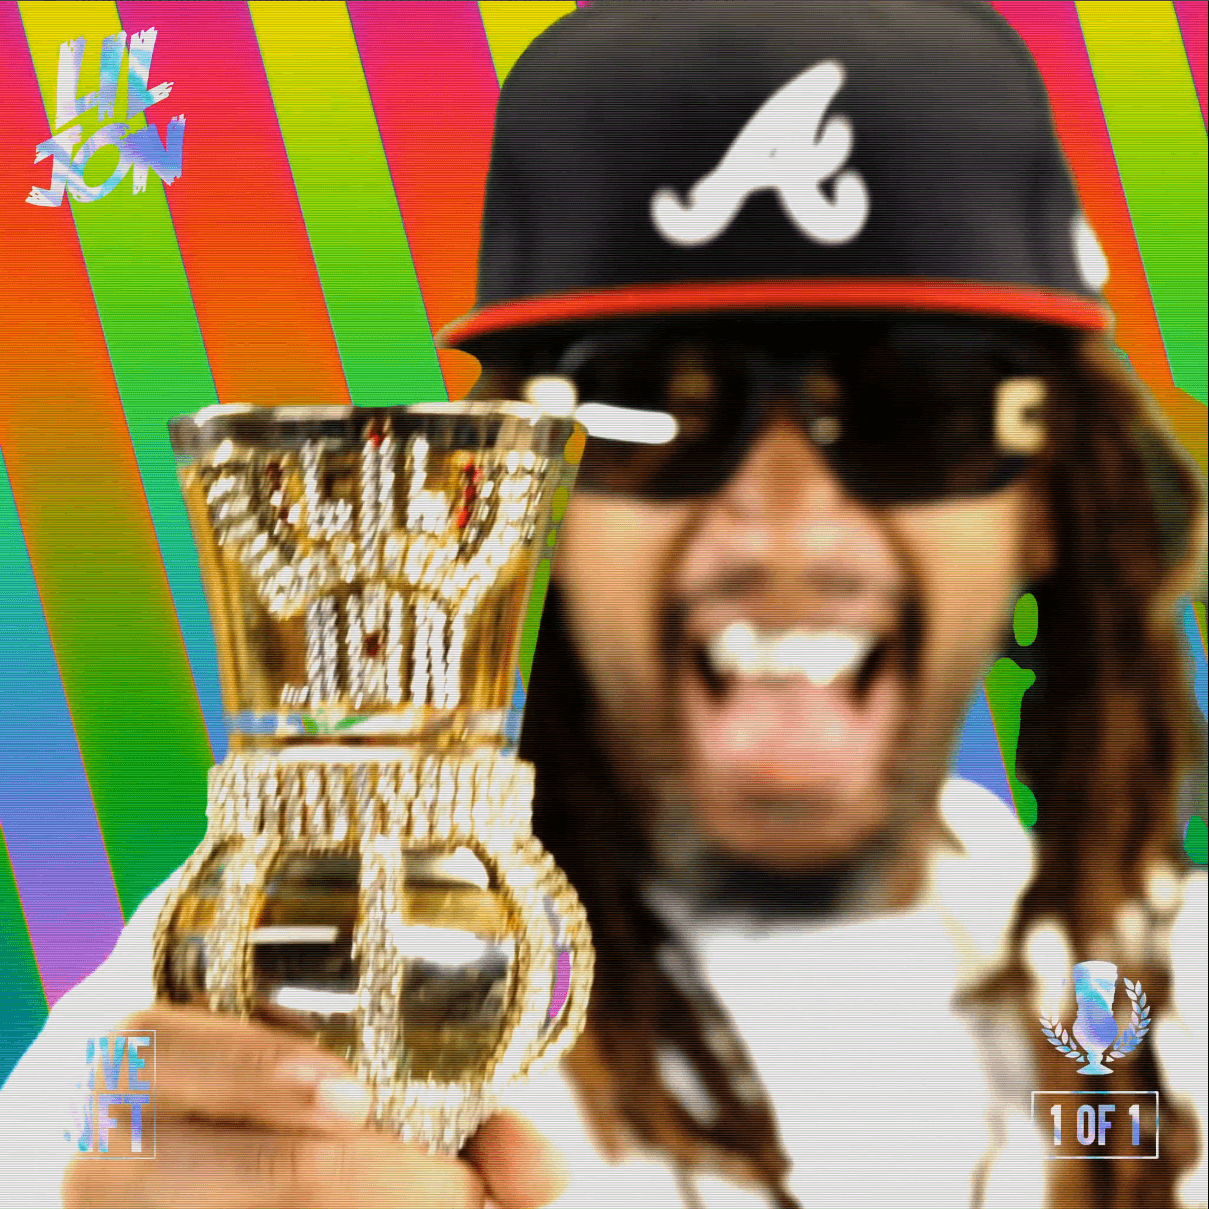 Lil Jon - Pimp Cup NFT and Physical Cup (1 of 1)